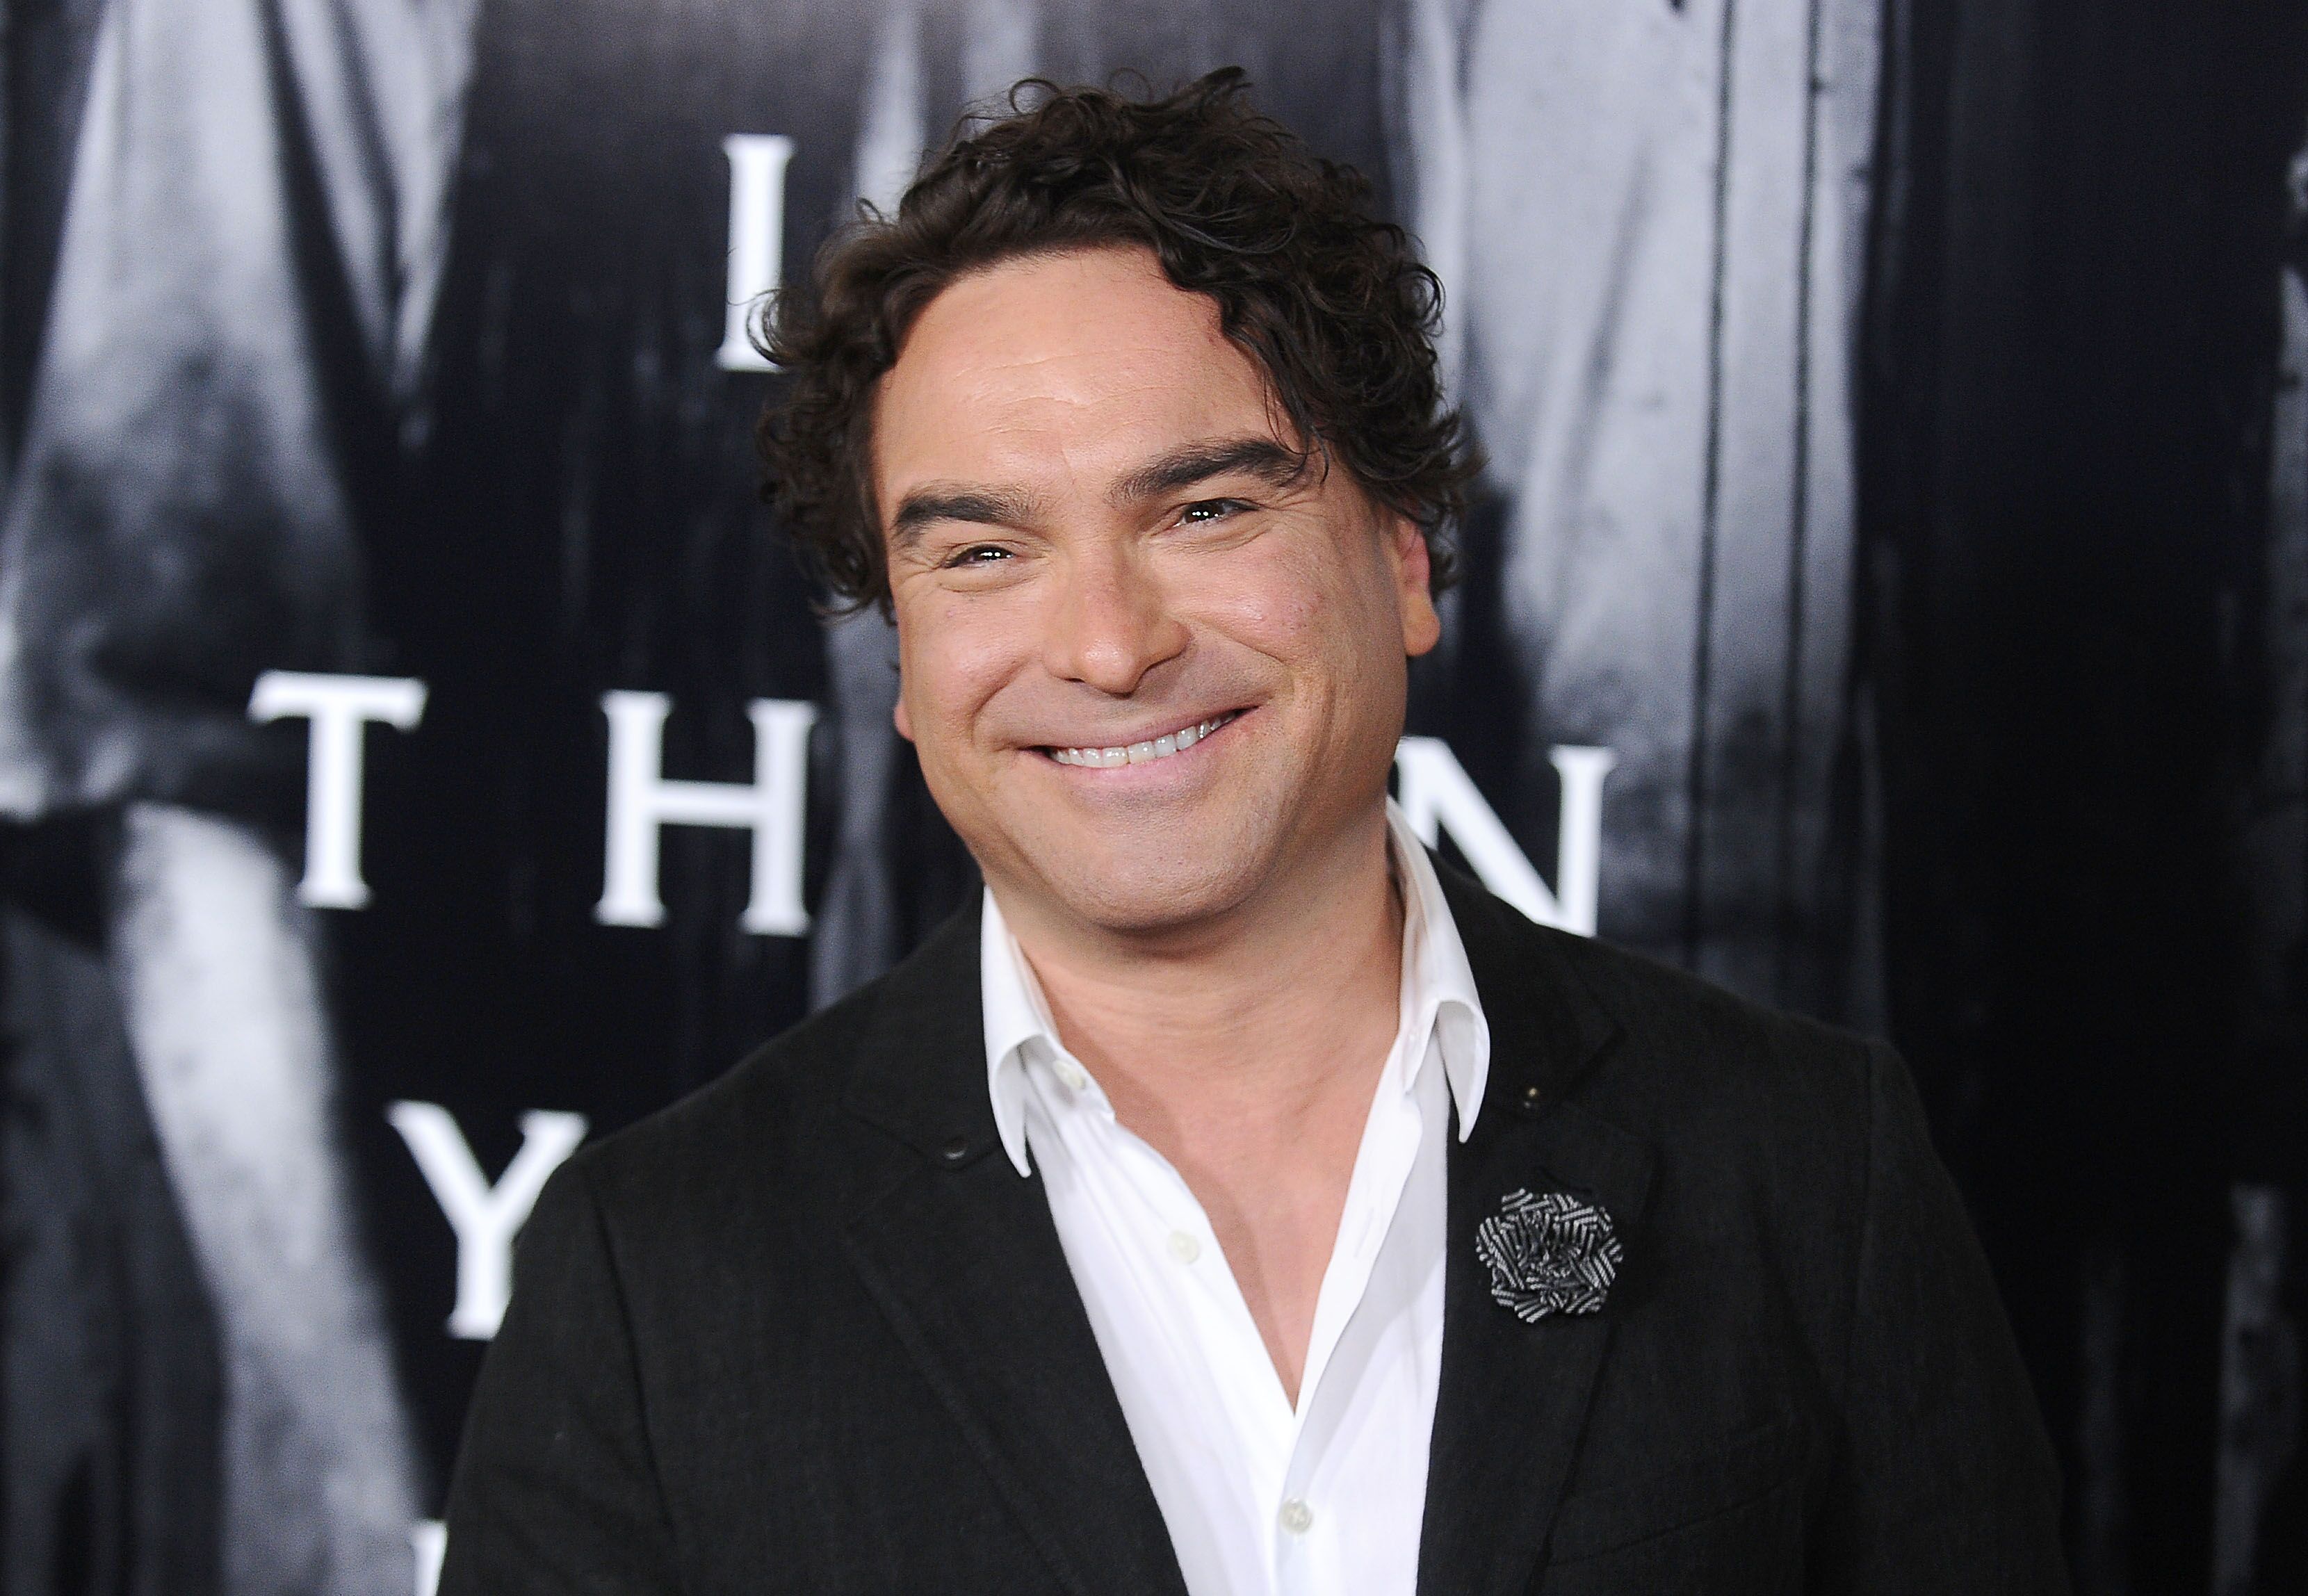 Johnny Galecki attends a screening of "Rings" at Regal LA Live Stadium 14 on February 2, 2017 in Los Angeles, California. | Source: Getty Images